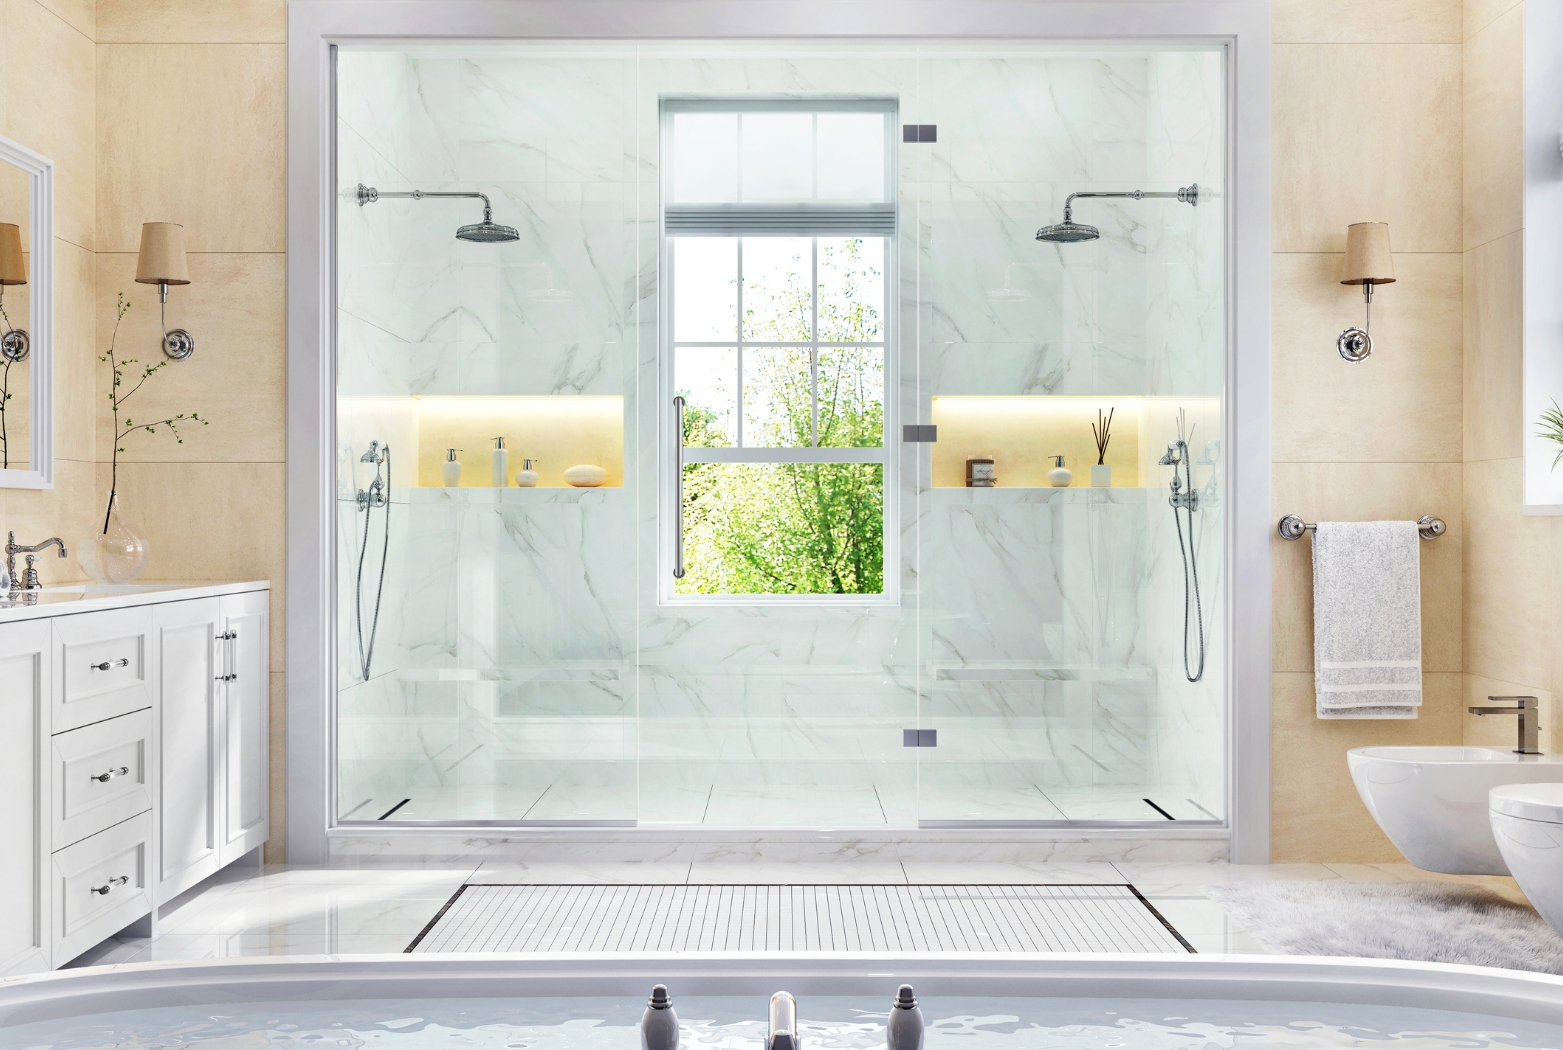 The 5 Must-Haves for a Luxury Bathroom